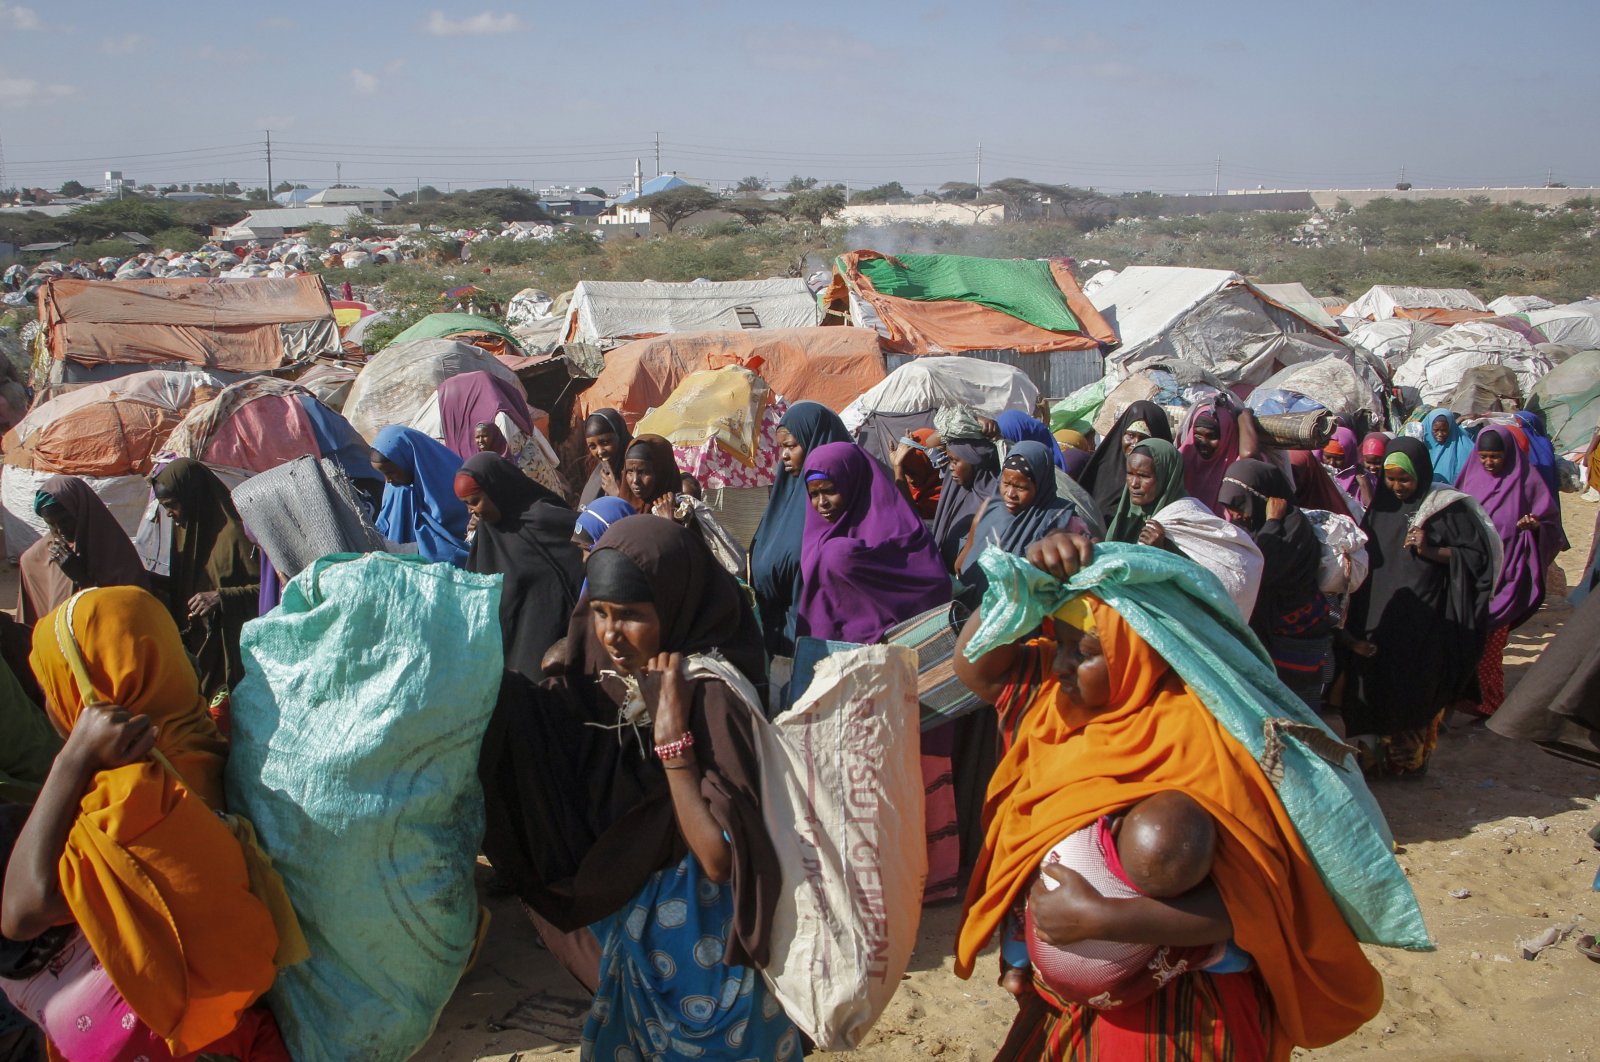 Somalis who fled drought-stricken areas carry their belongings as they arrive at a makeshift camp on the outskirts of the capital Mogadishu, Somalia, Feb. 4, 2022. (AP Photo)